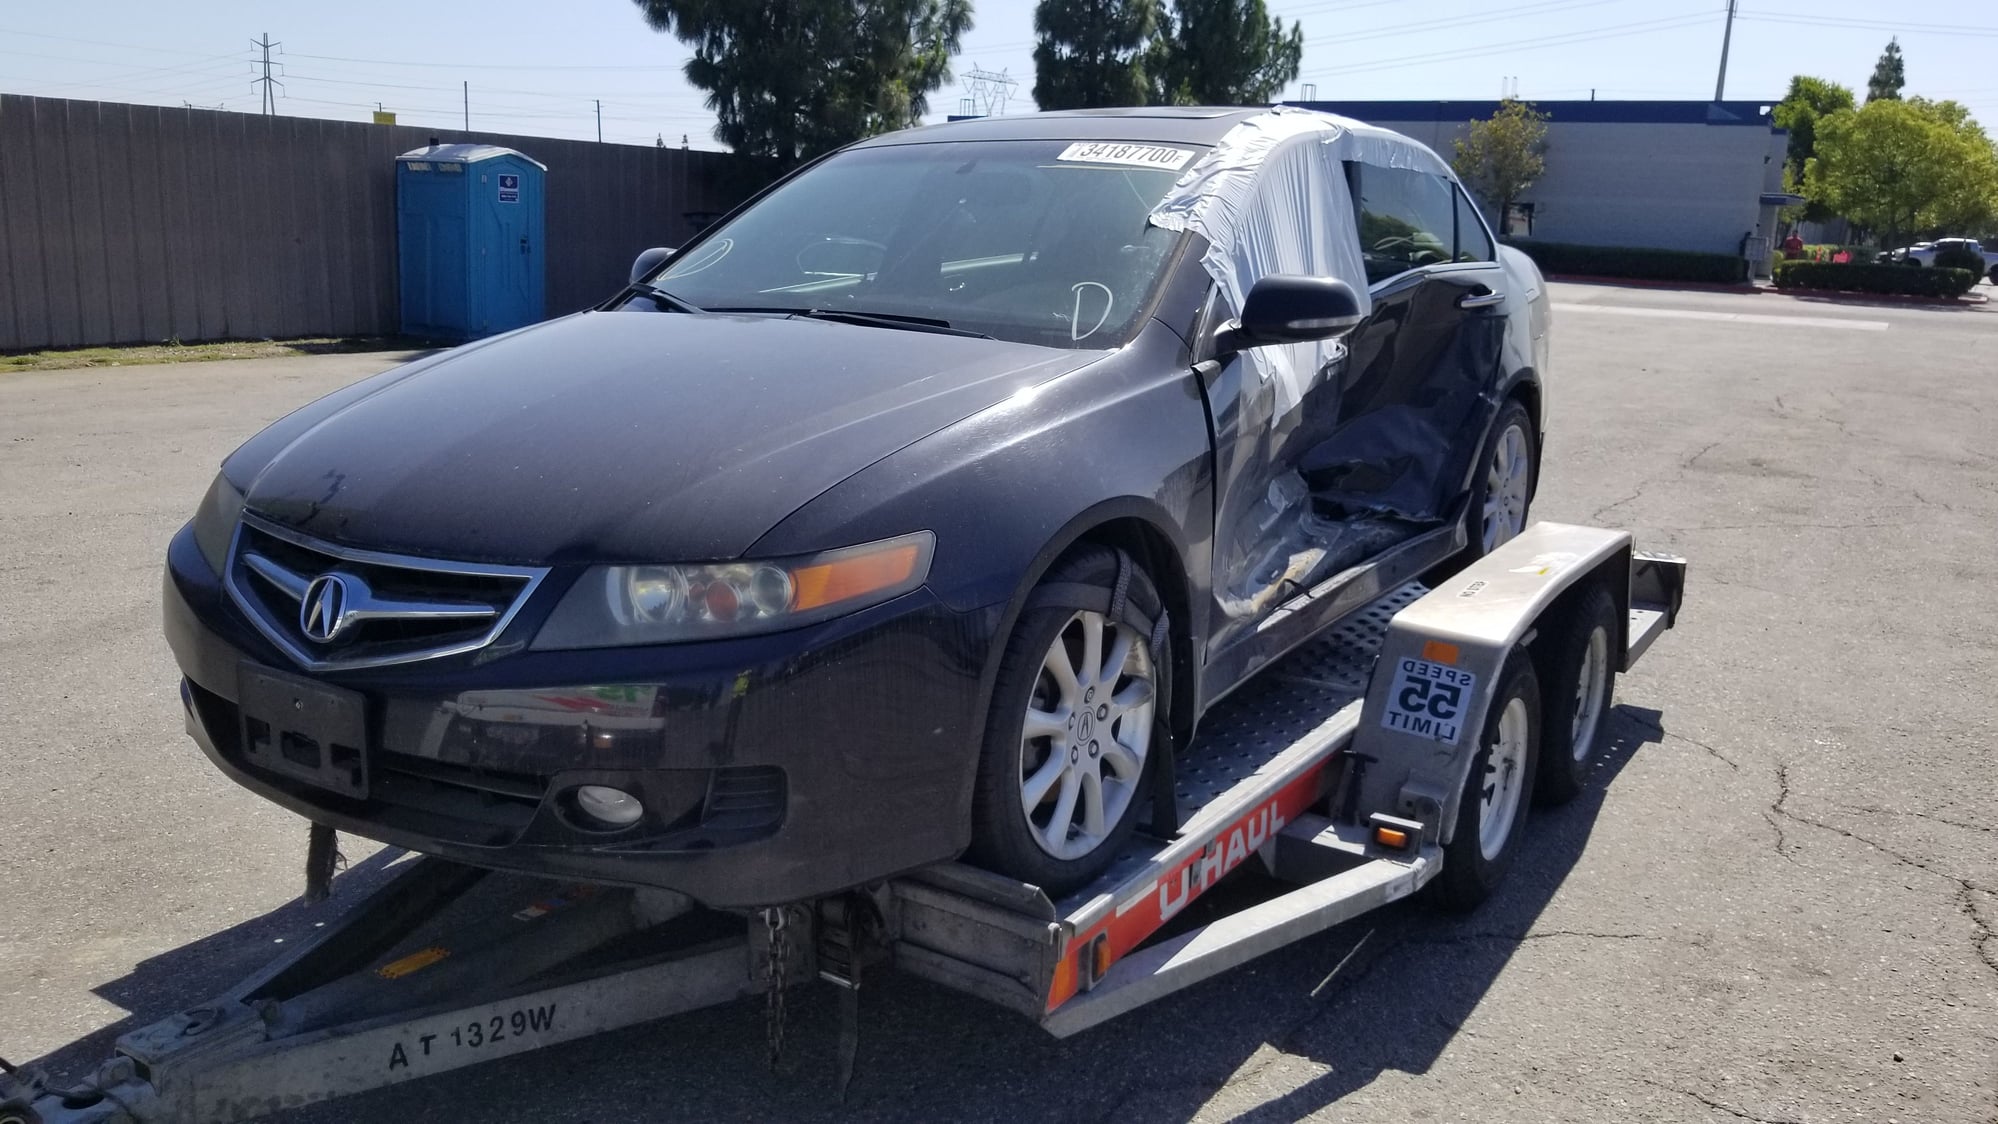 2008 Acura TSX - CLOSED: 2008 Acura TSX PART OUT!! - Ontario, CA 91762, United States